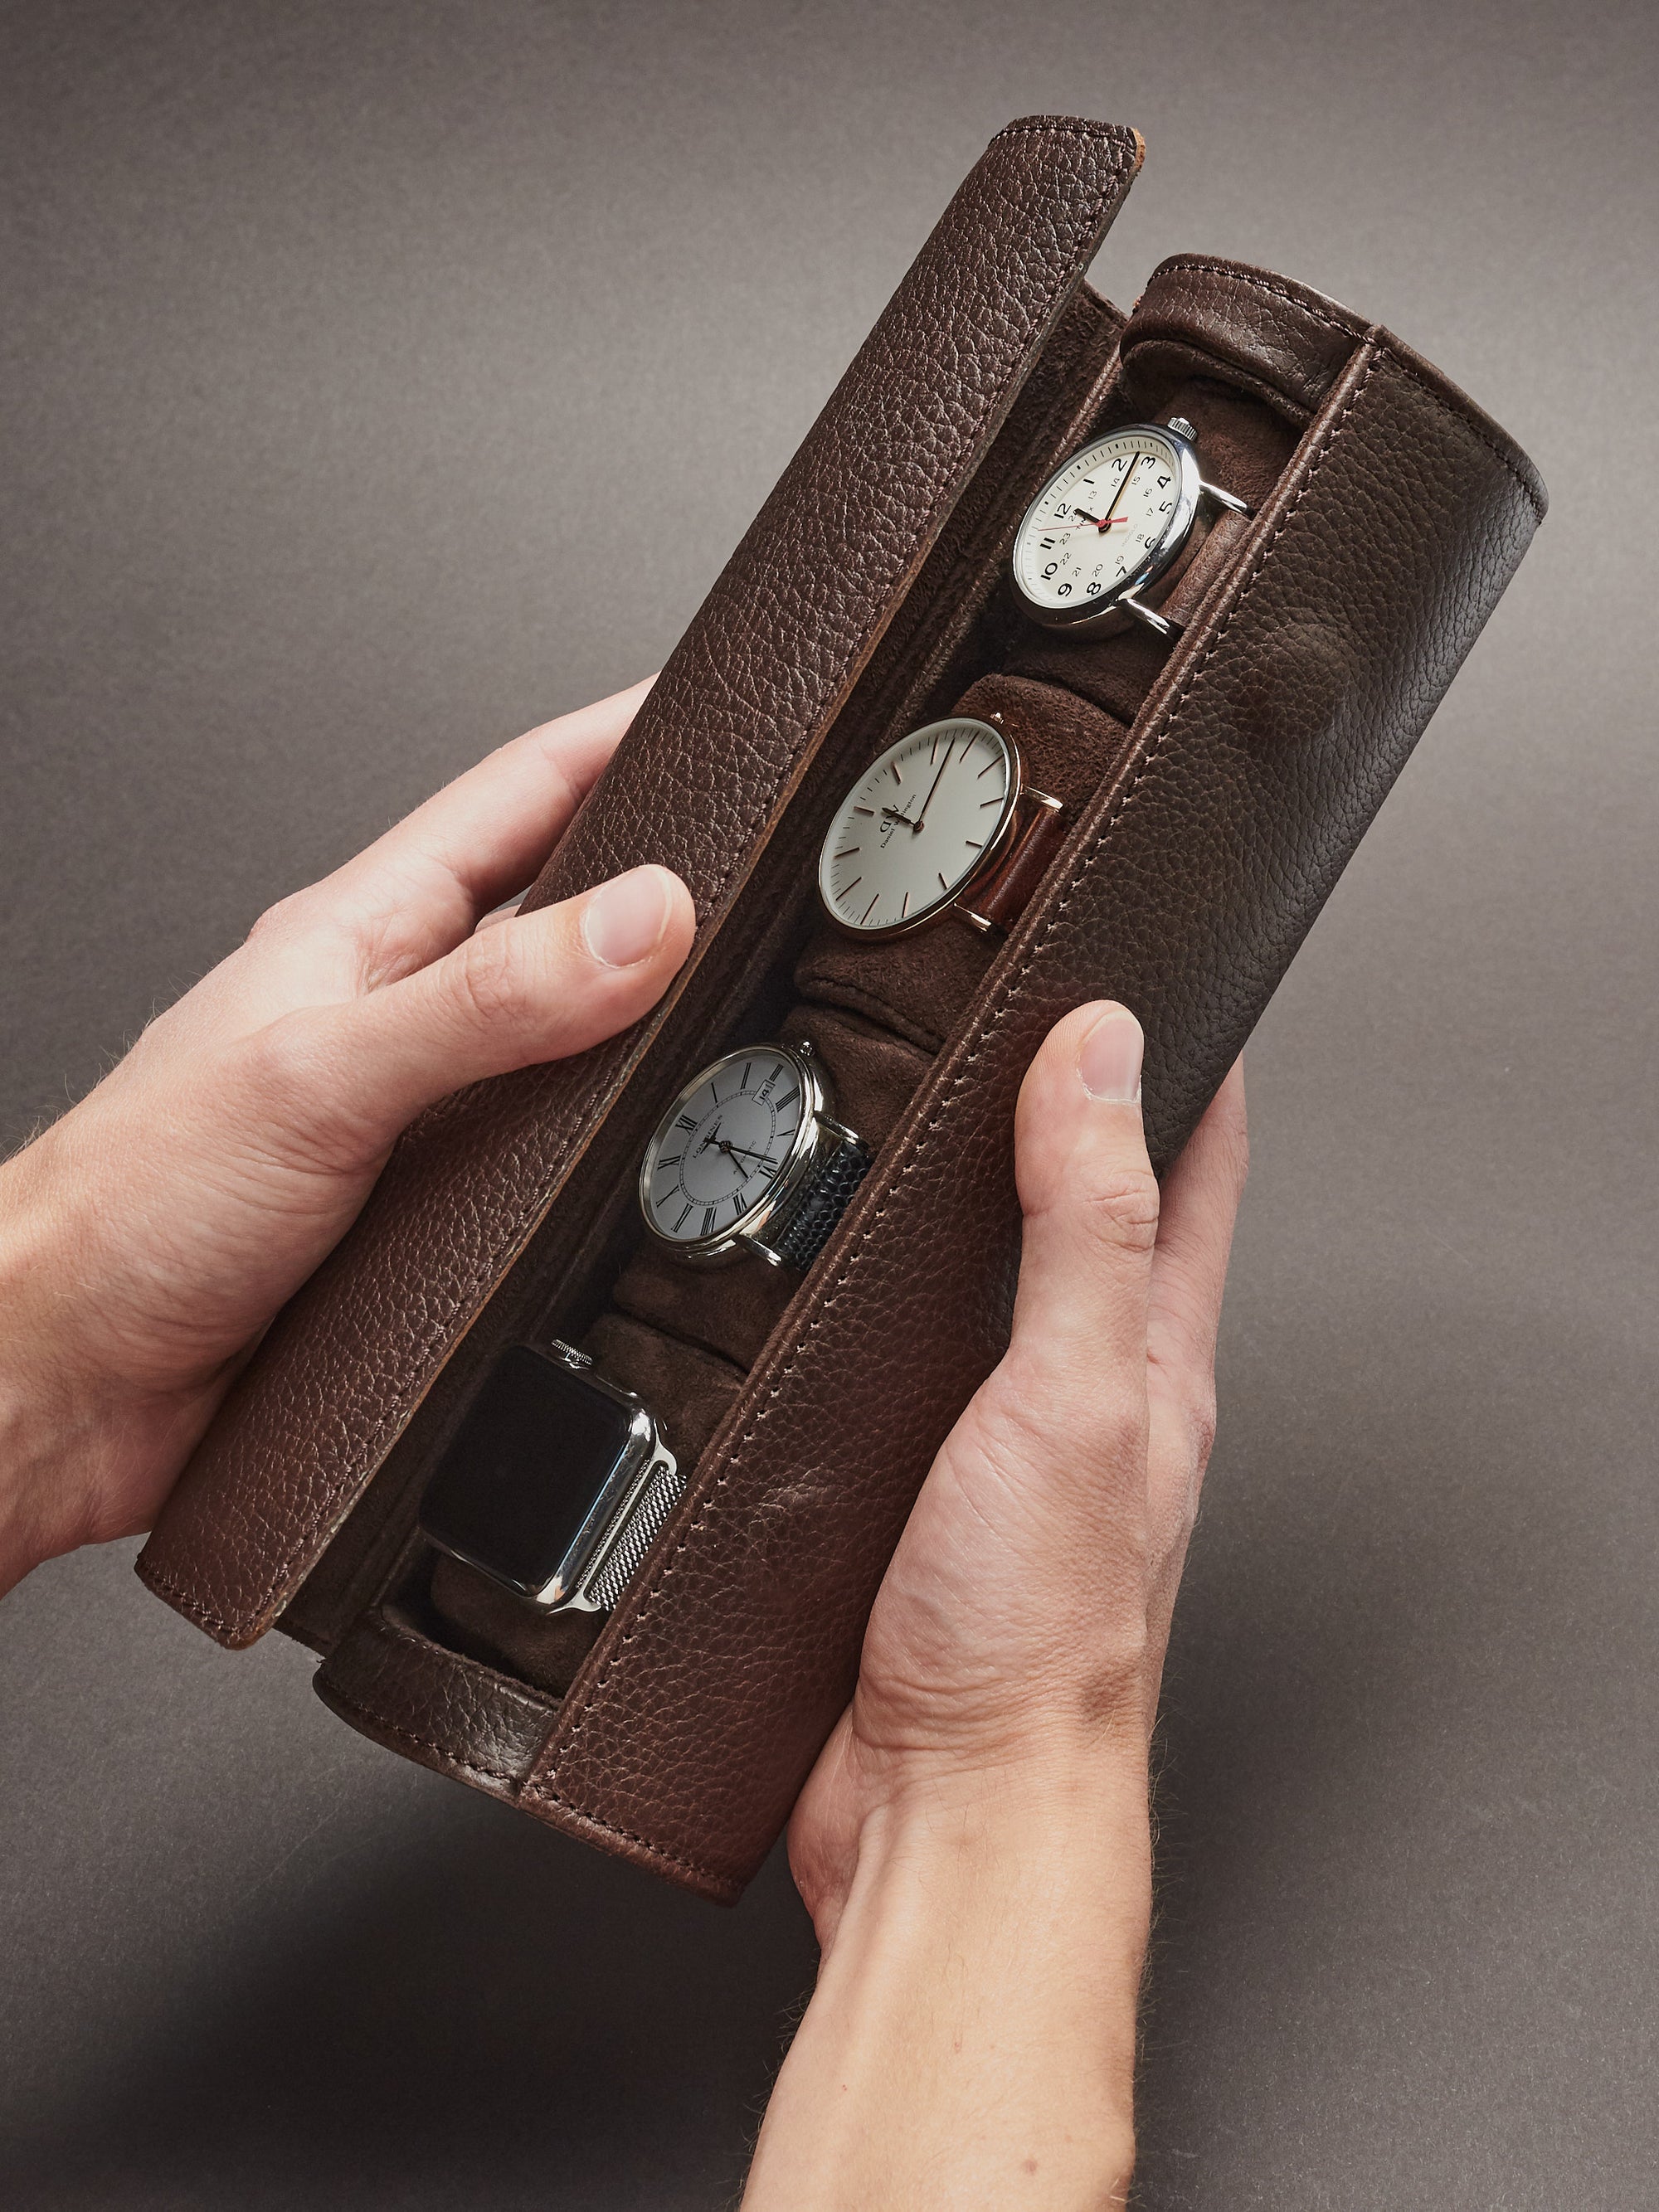 WHAT IS THE BEST WATCH ROLL? Wolf, Watch Stand or Louis Vuitton ? 